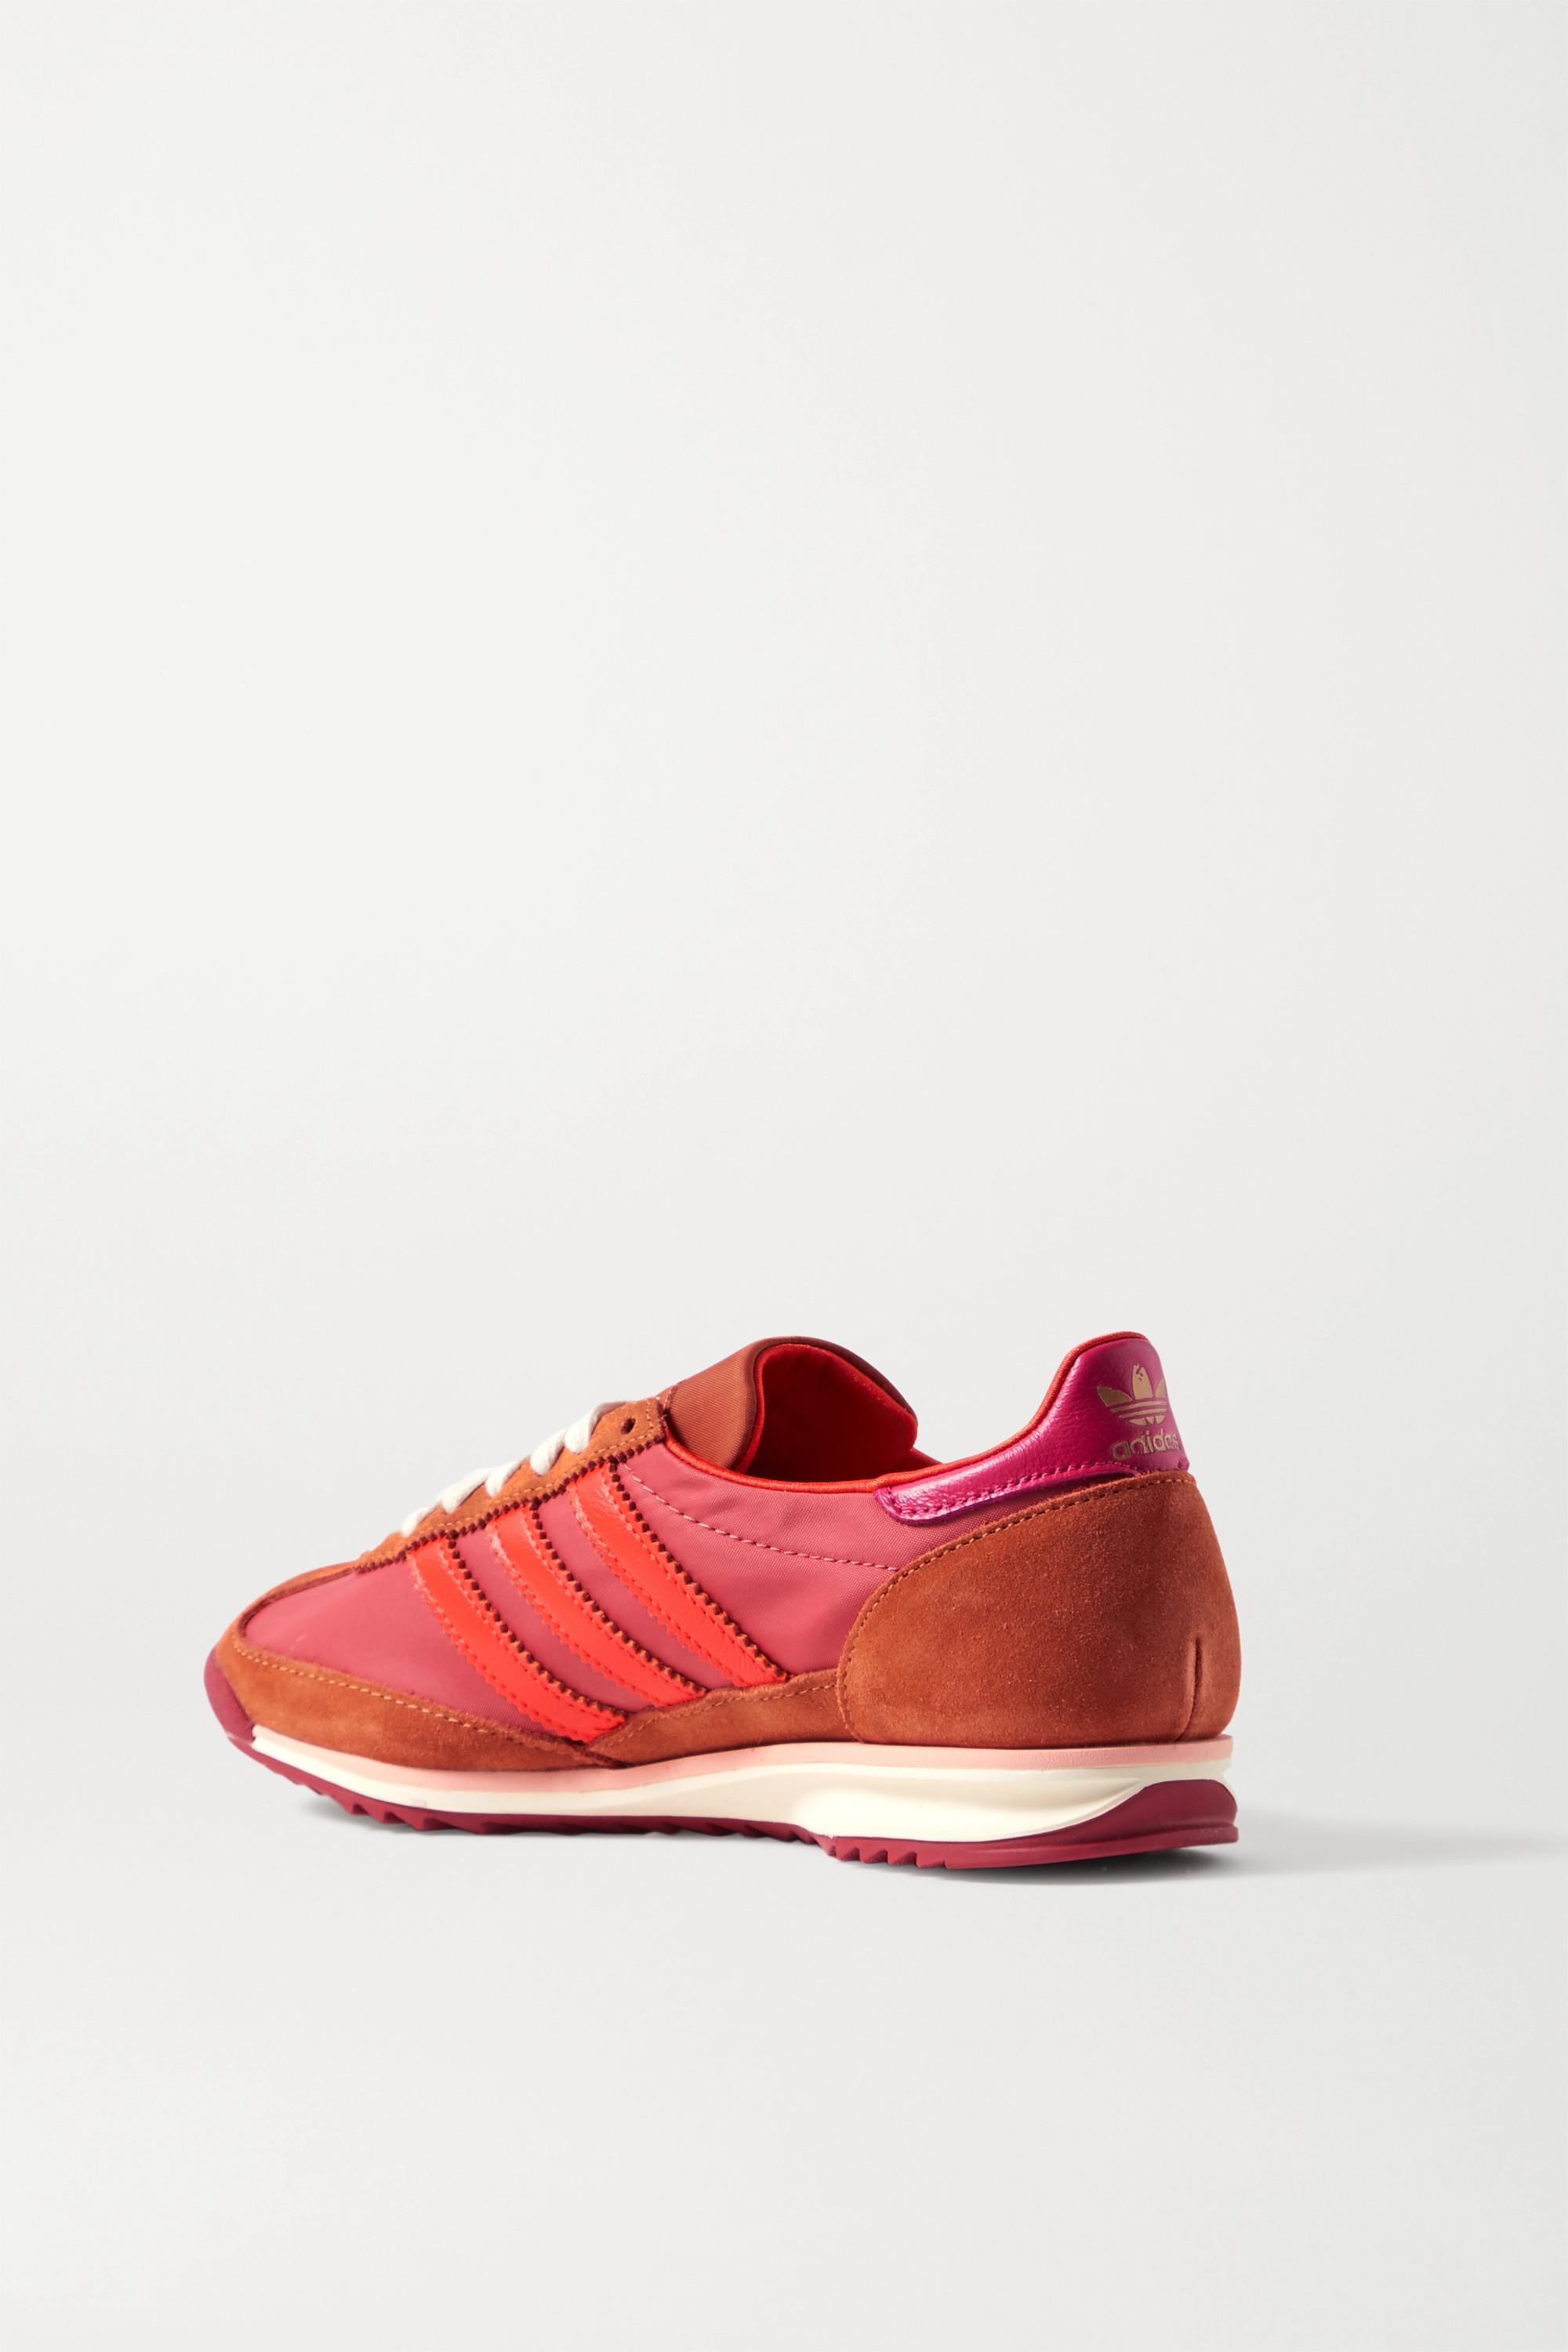 adidas Originals + Wales Bonner Sl 72 Shell, Leather And Suede Sneakers in  Red | Lyst